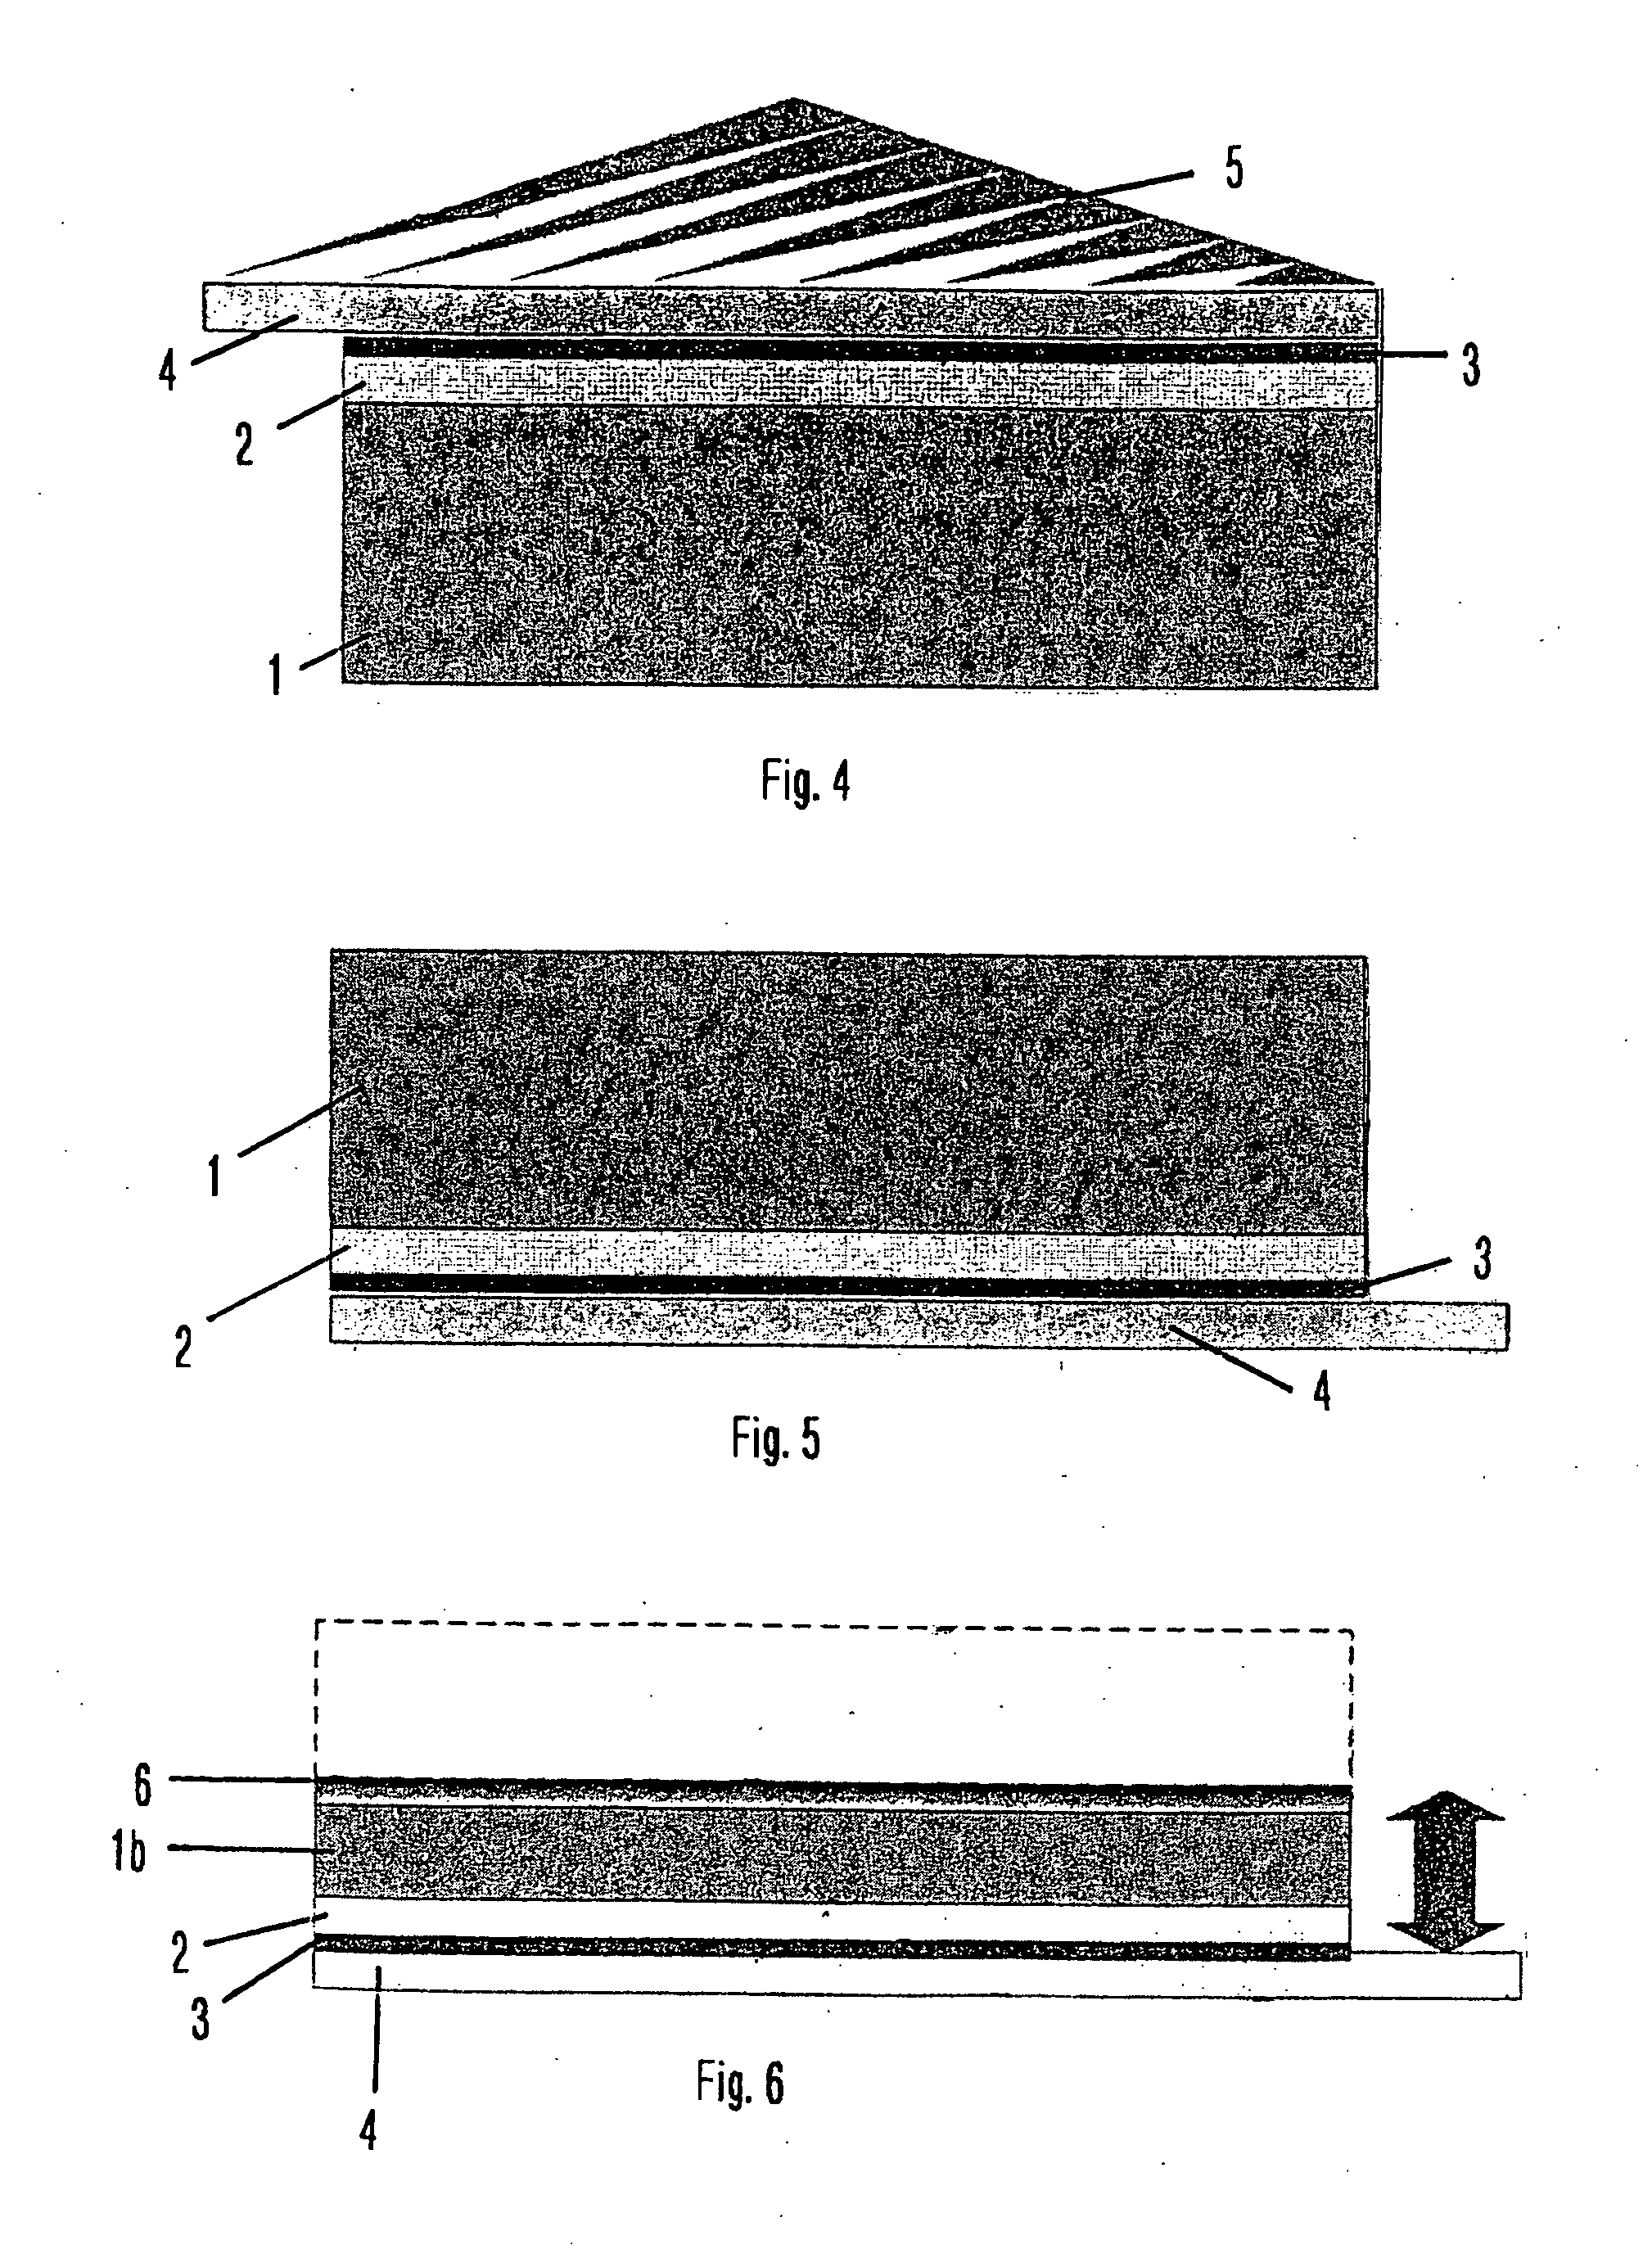 Method and device for machining a wafer, in addition to a wafer comprising a separation layer and a support layer